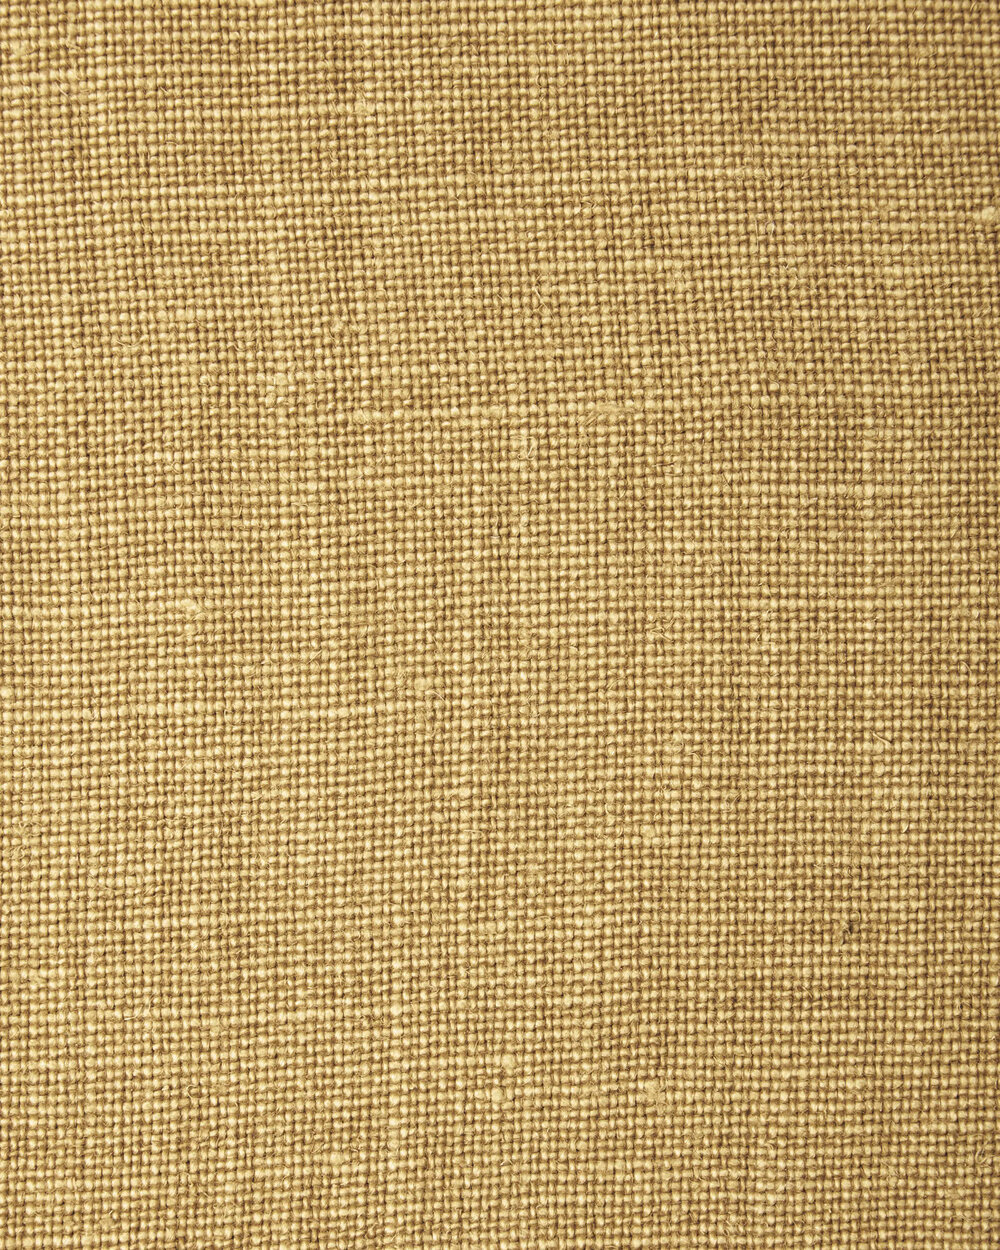 Serena &amp; Lily, Washed Linen Fabric in Gold